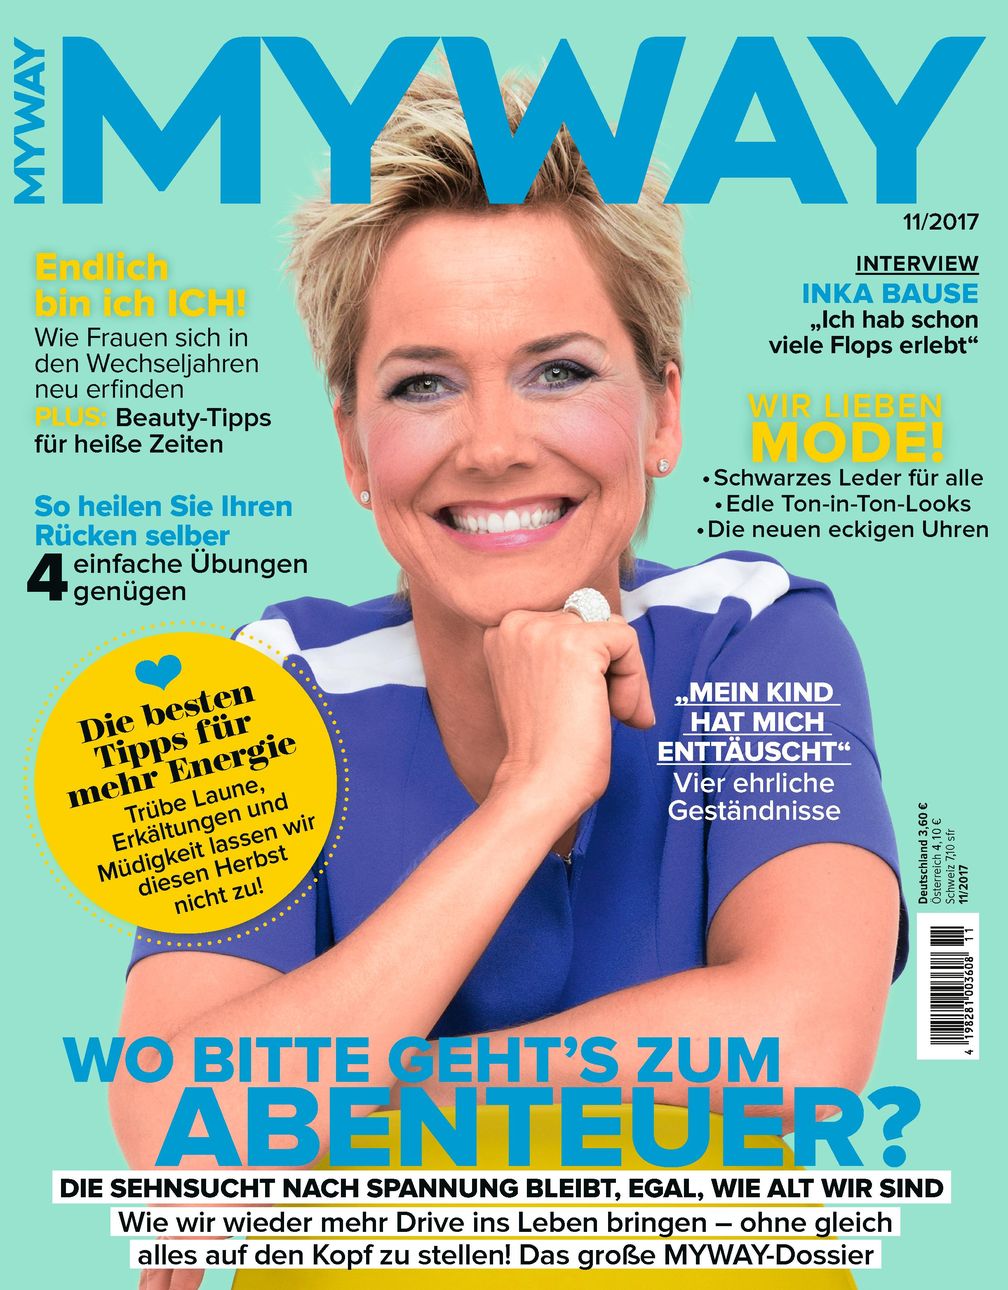 MYWAY Cover 11/2017. Bild: "obs/Bauer Media Group, MYWAY/MYWAY"